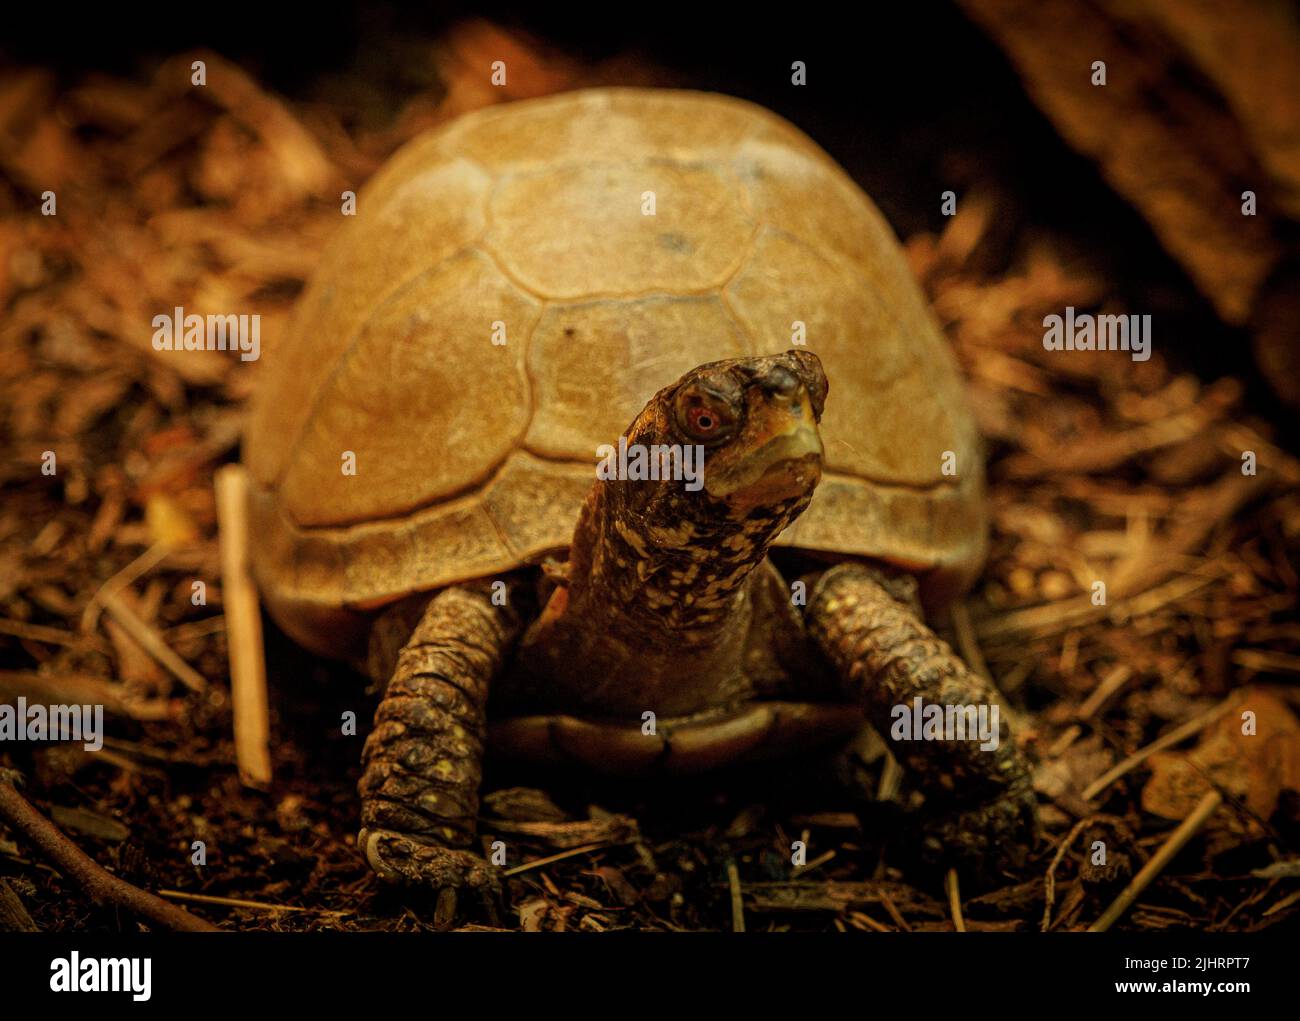 A closeup view of a turtle on the ground Stock Photo